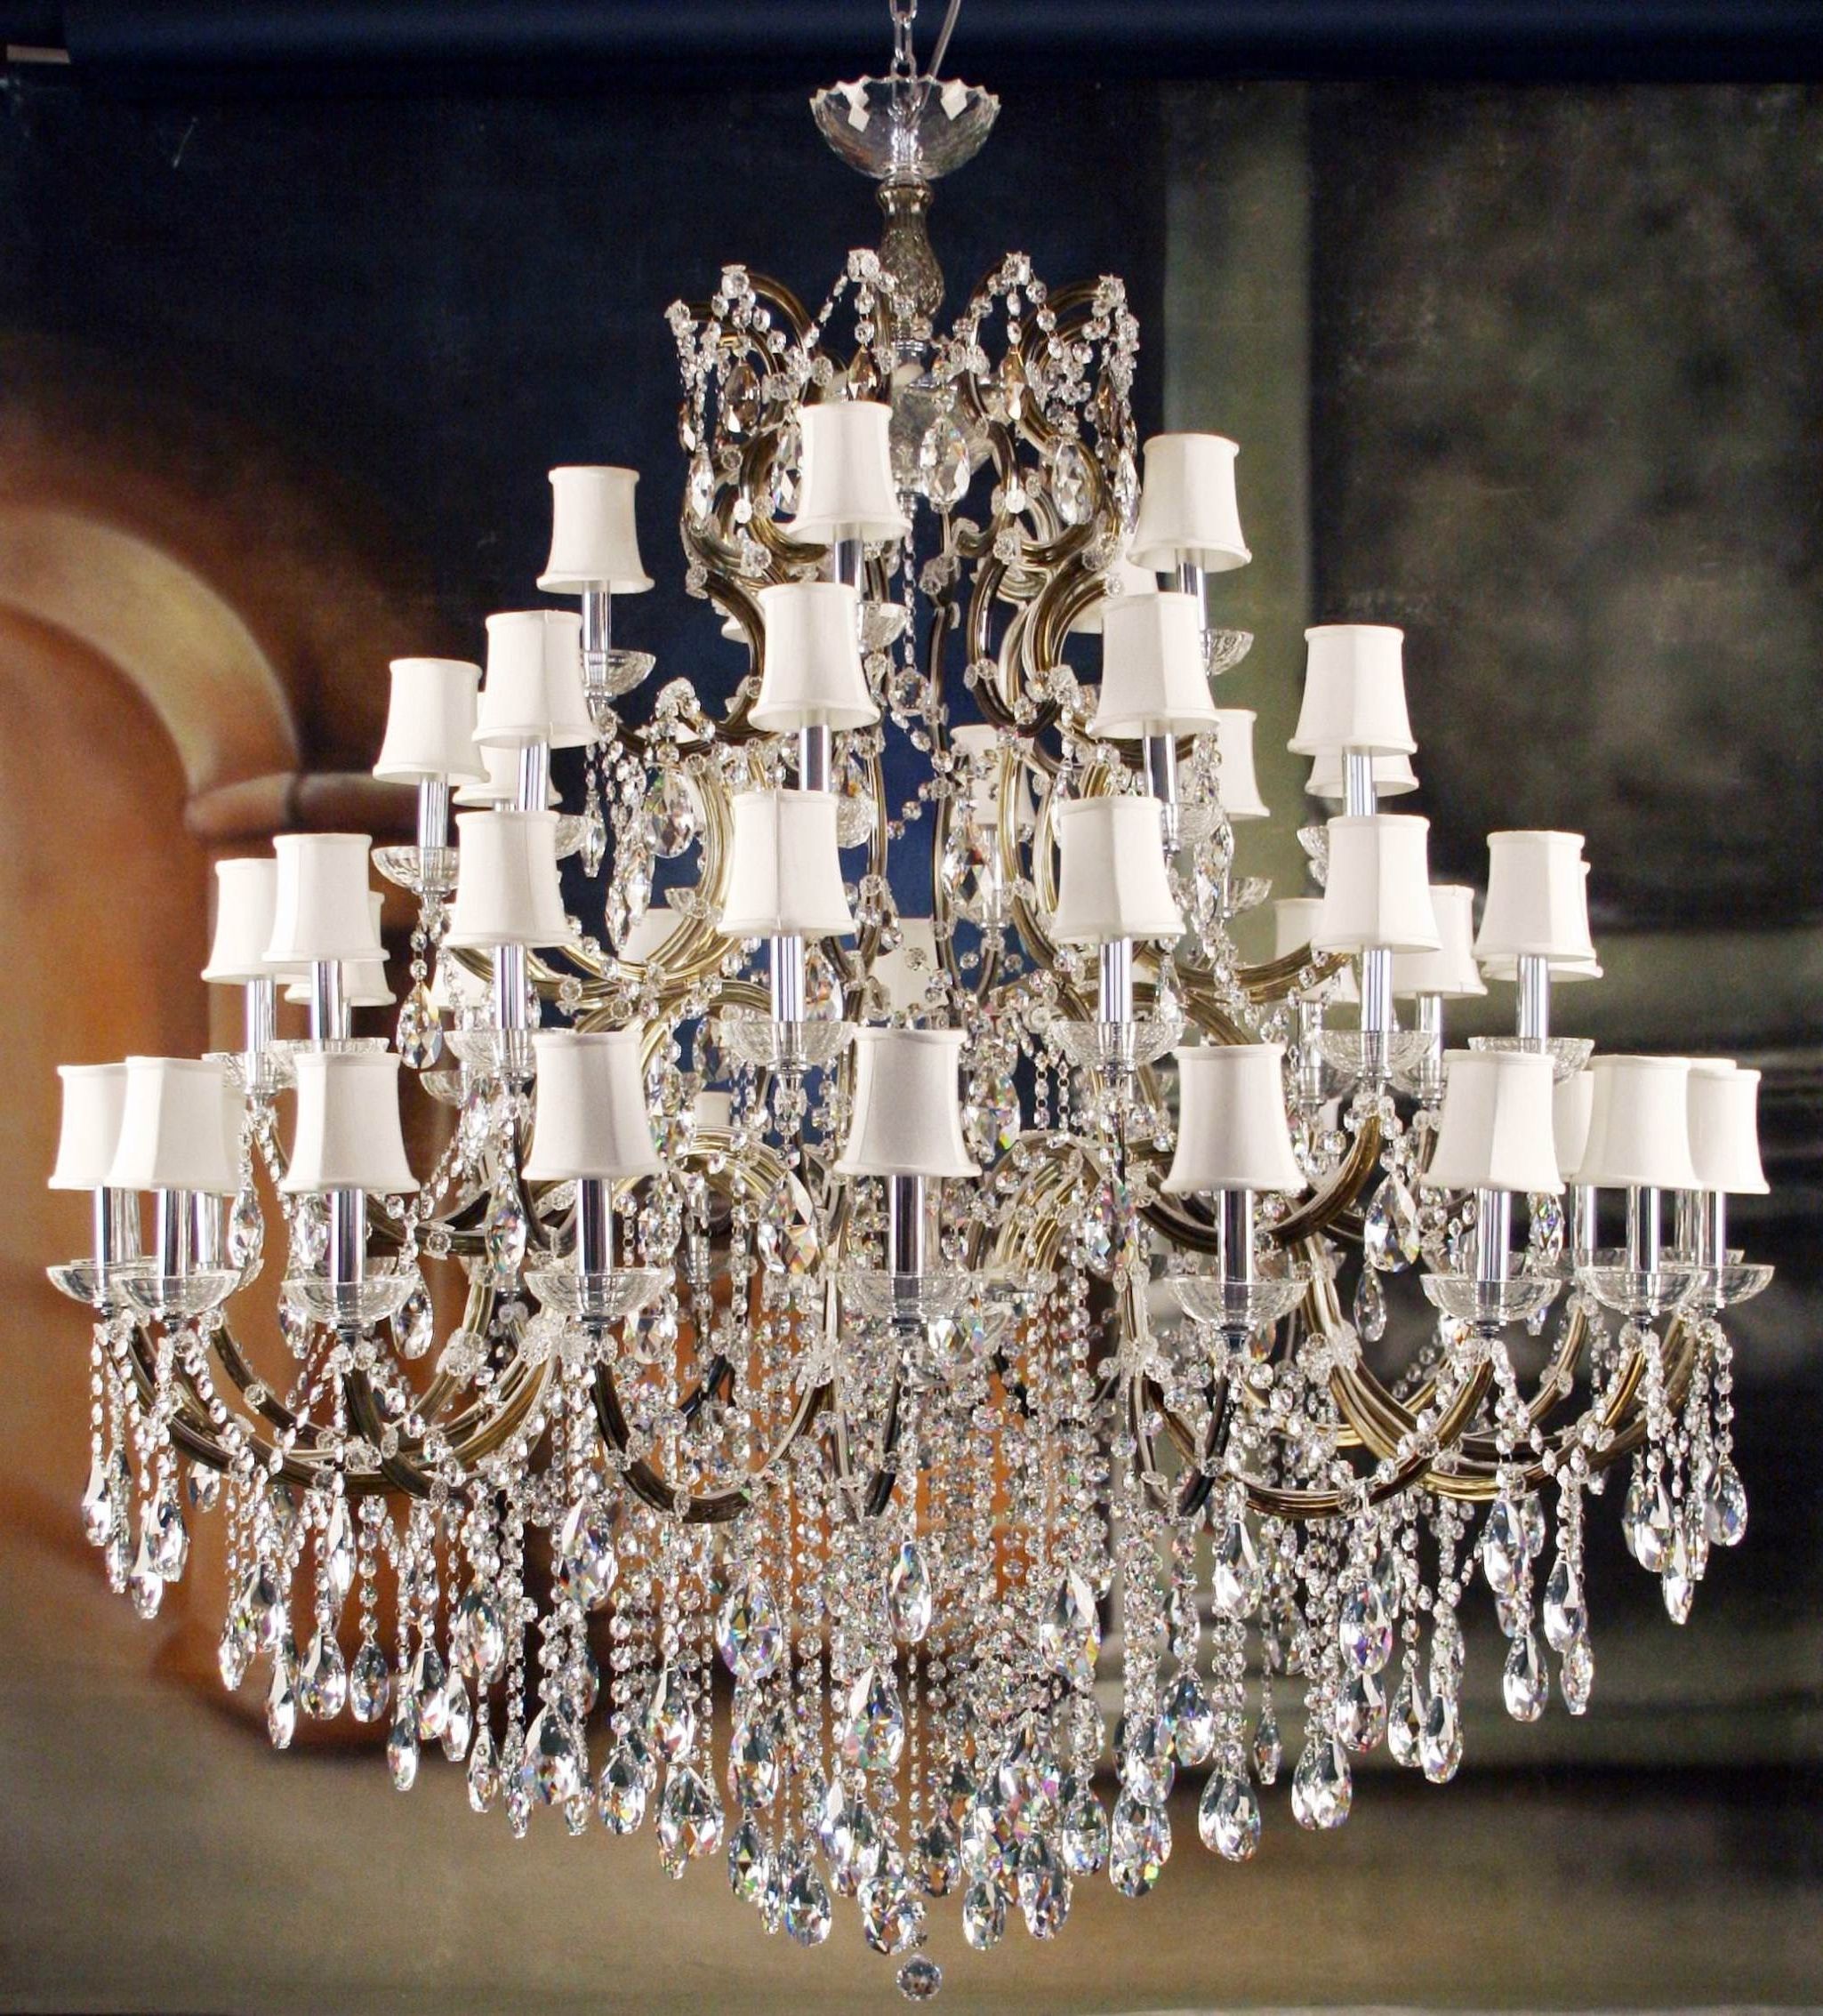 Most Popular Light : Fancy Living Room High Quality Crystal Chandeliers For Home In Small Rustic Crystal Chandeliers (View 4 of 20)